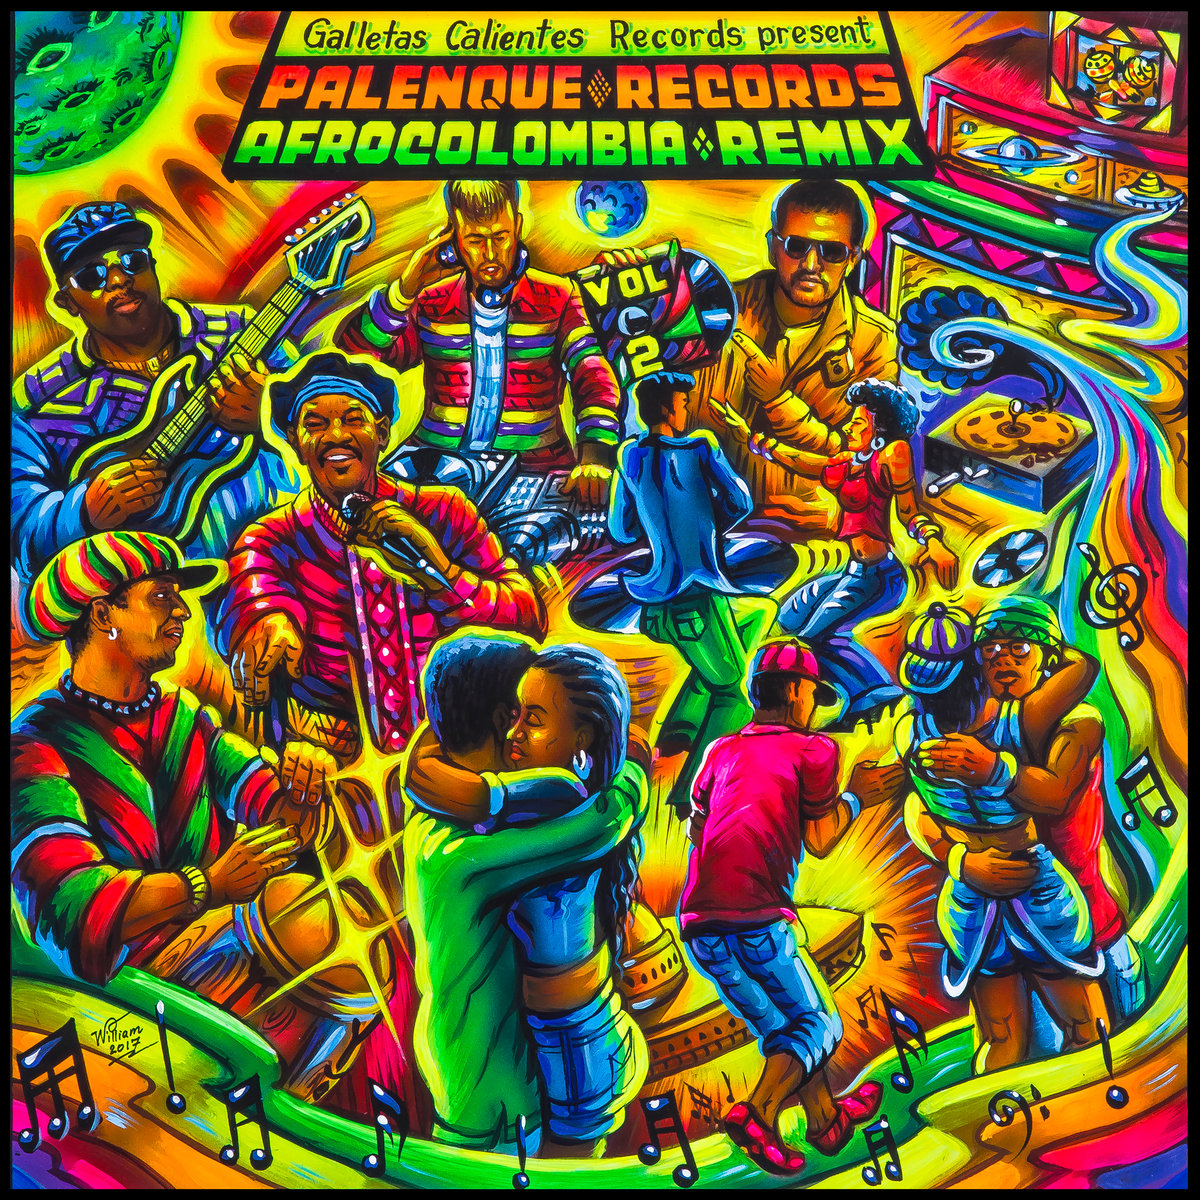 V.A. (PALENQUE RECORDS AFROCOLOMBIA REMIX) / オムニバス / PALENQUE RECORDS AFROCOLOMBIA REMIX VOL?. ?2